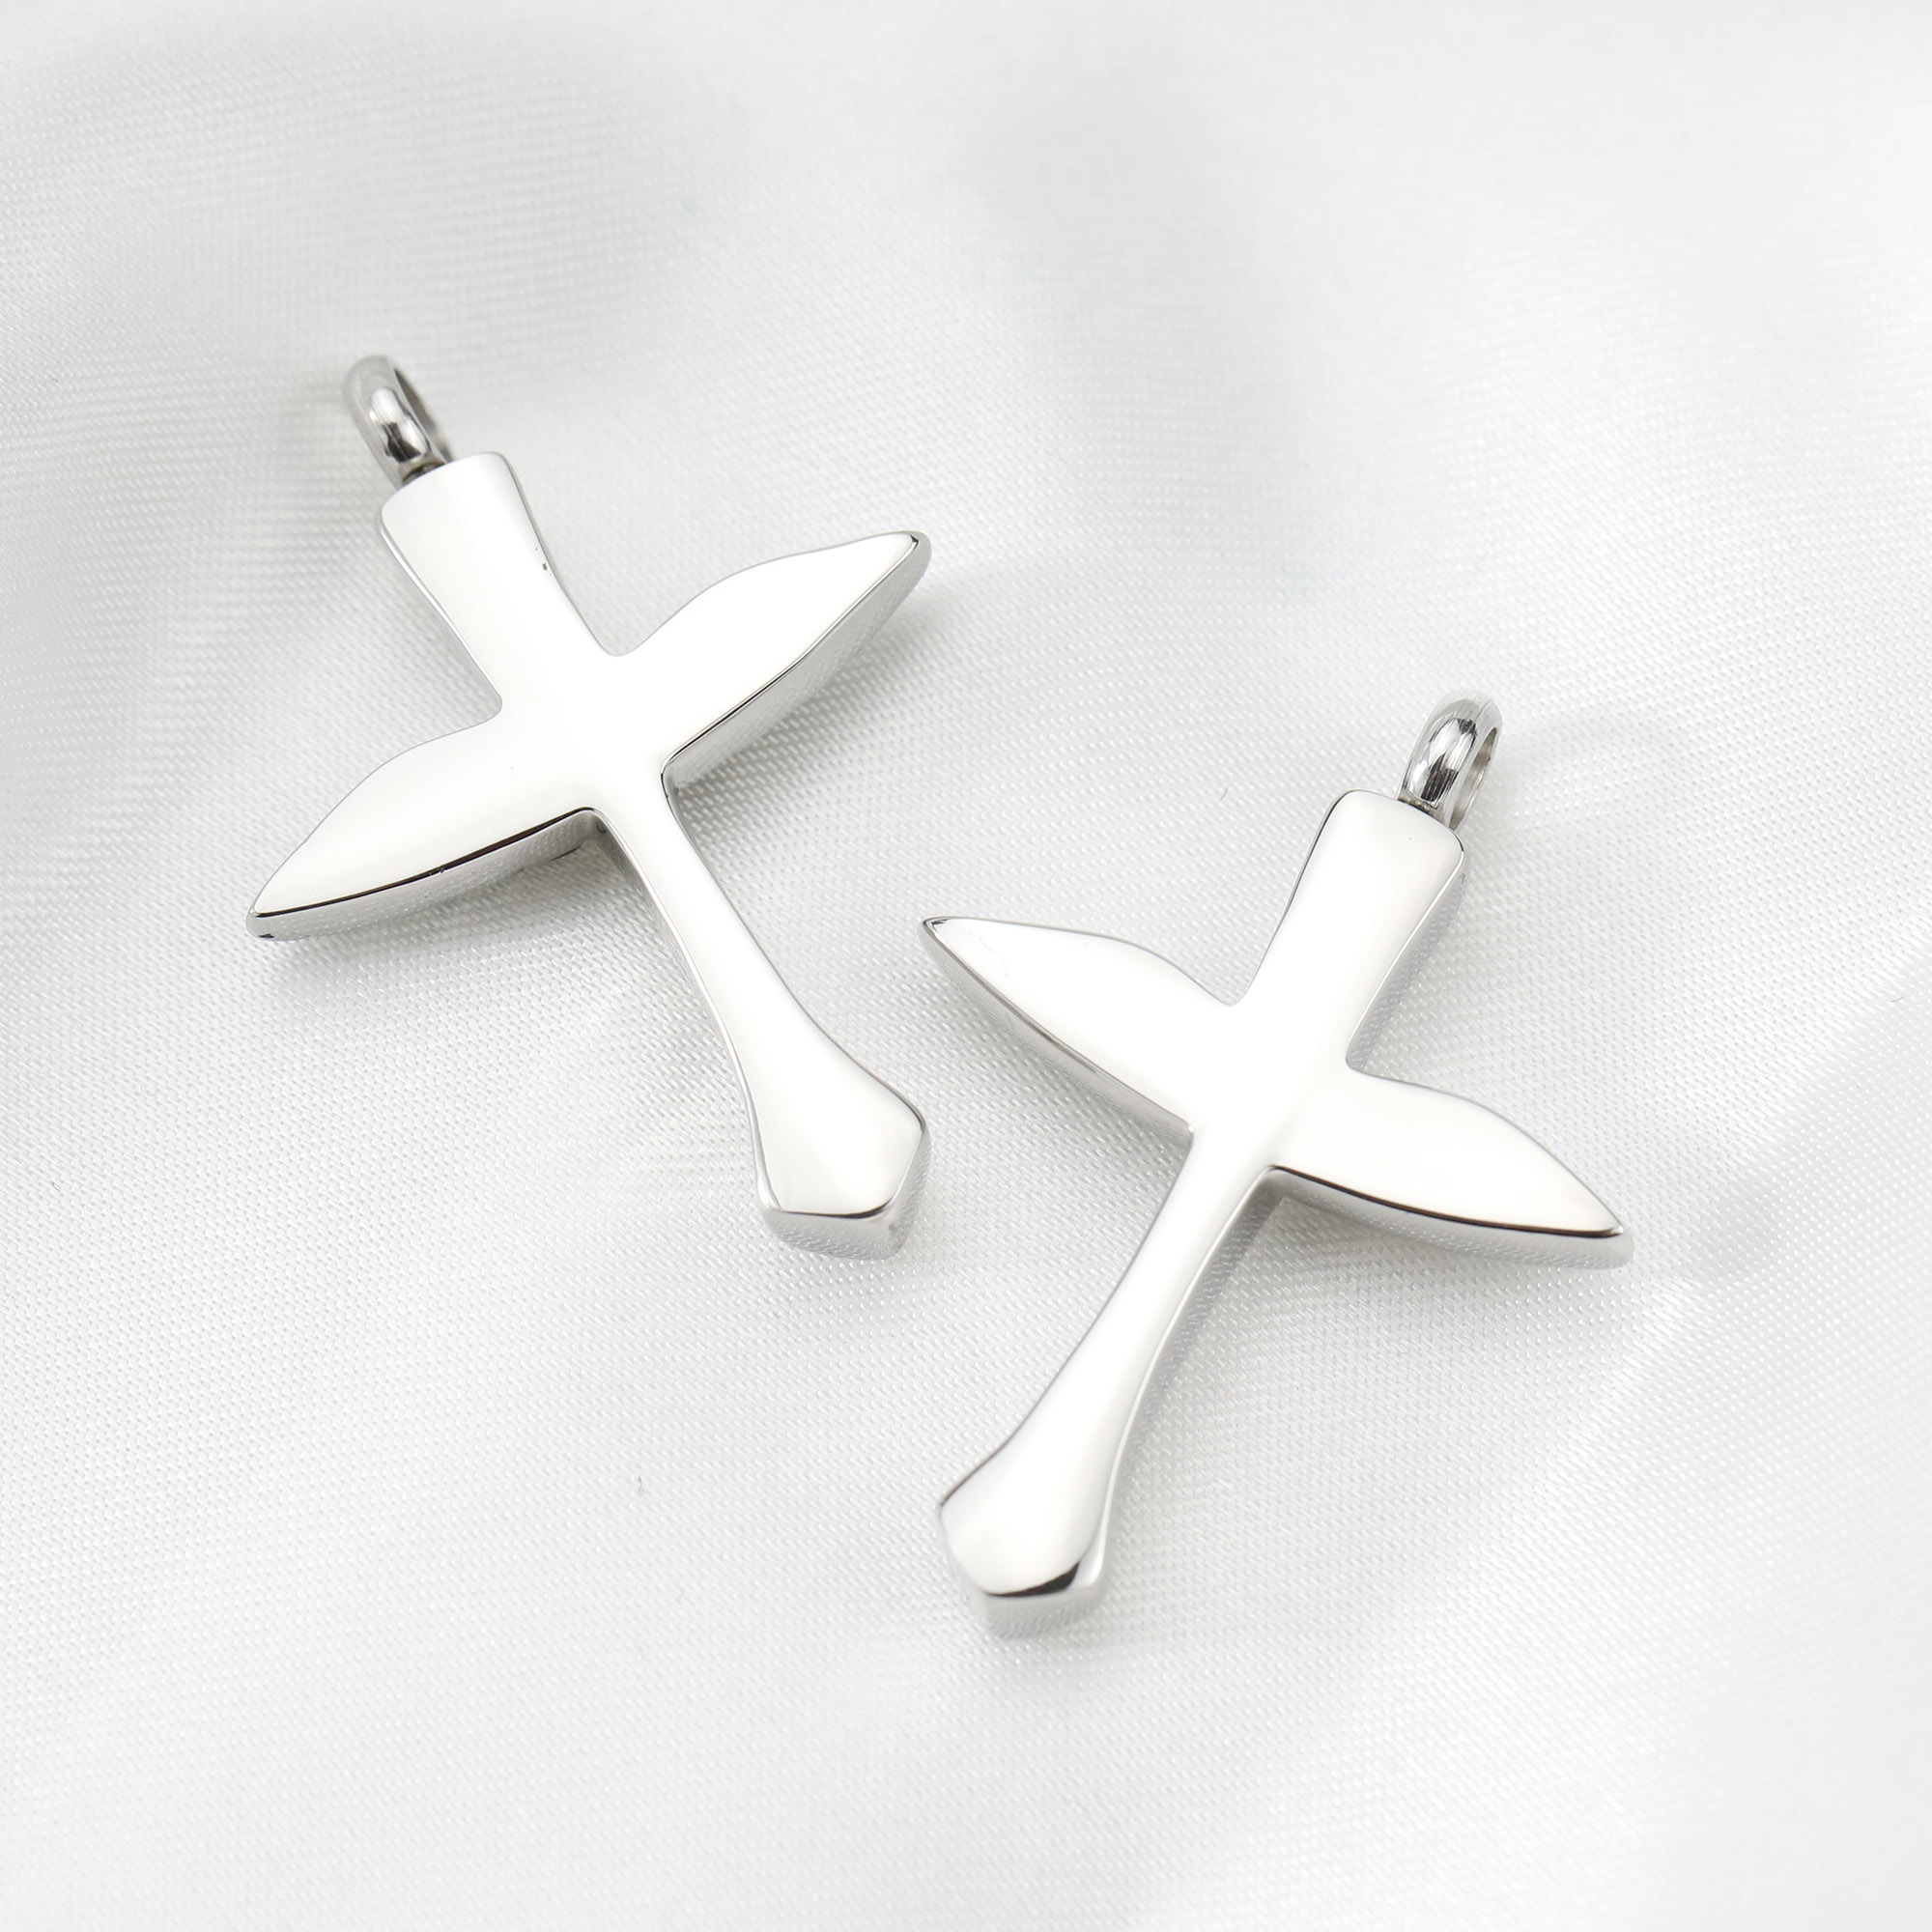 Keepsake Ash Canister Cremation Urn Set Cross Angel Wing Stainless Steel Wish Vial Pendant Prayer Box 26x38MM 1190044 - Click Image to Close